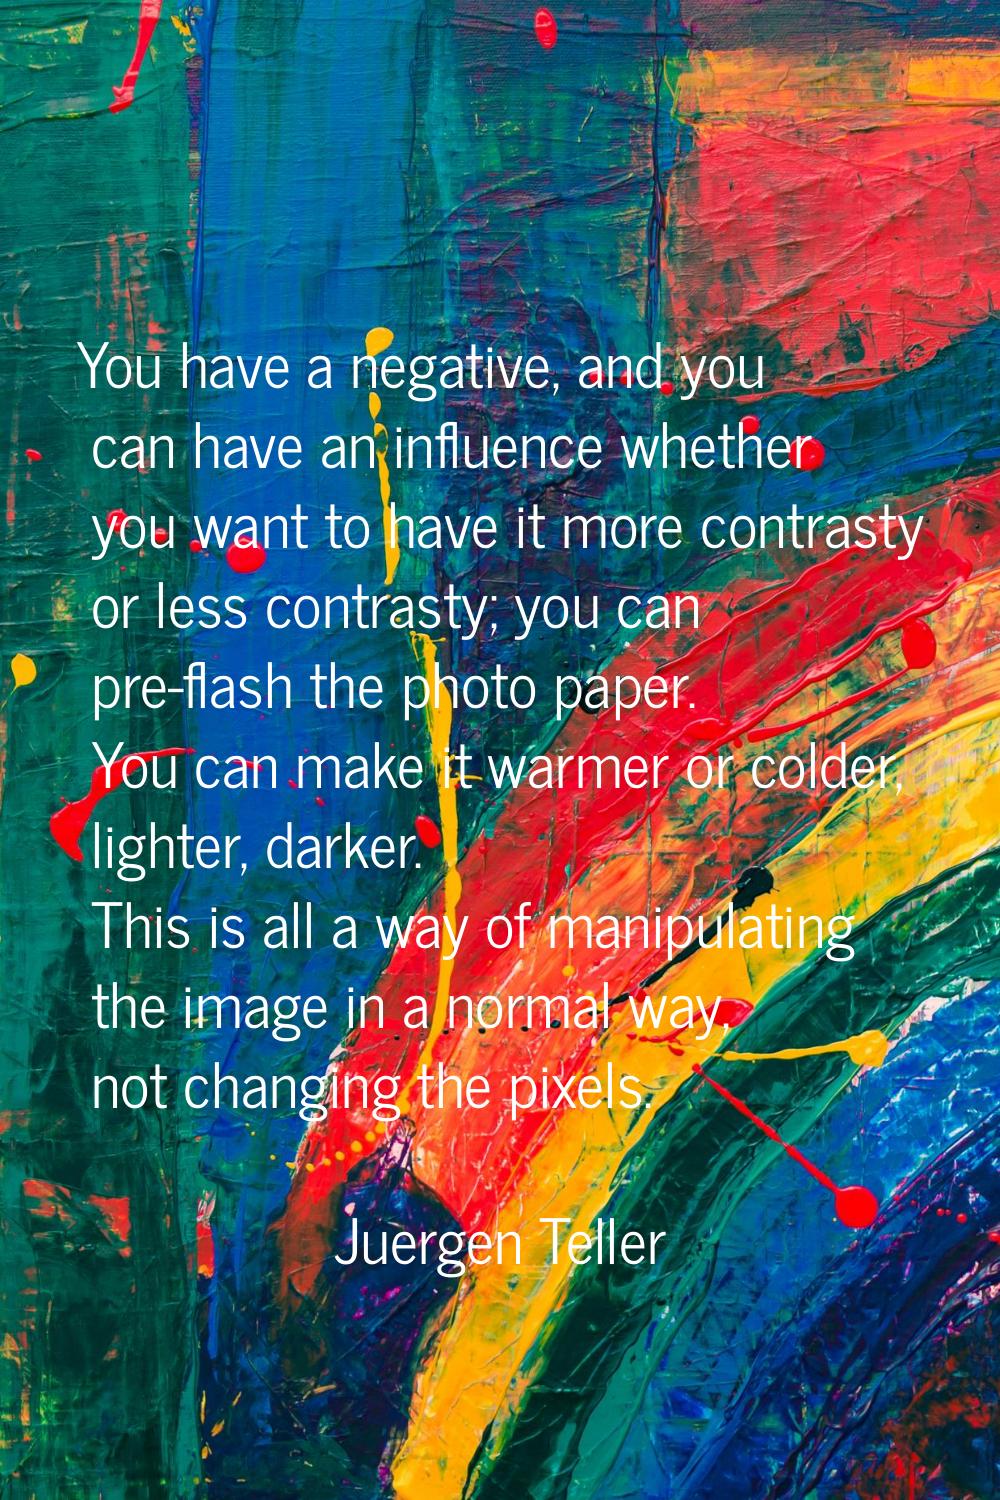 You have a negative, and you can have an influence whether you want to have it more contrasty or le